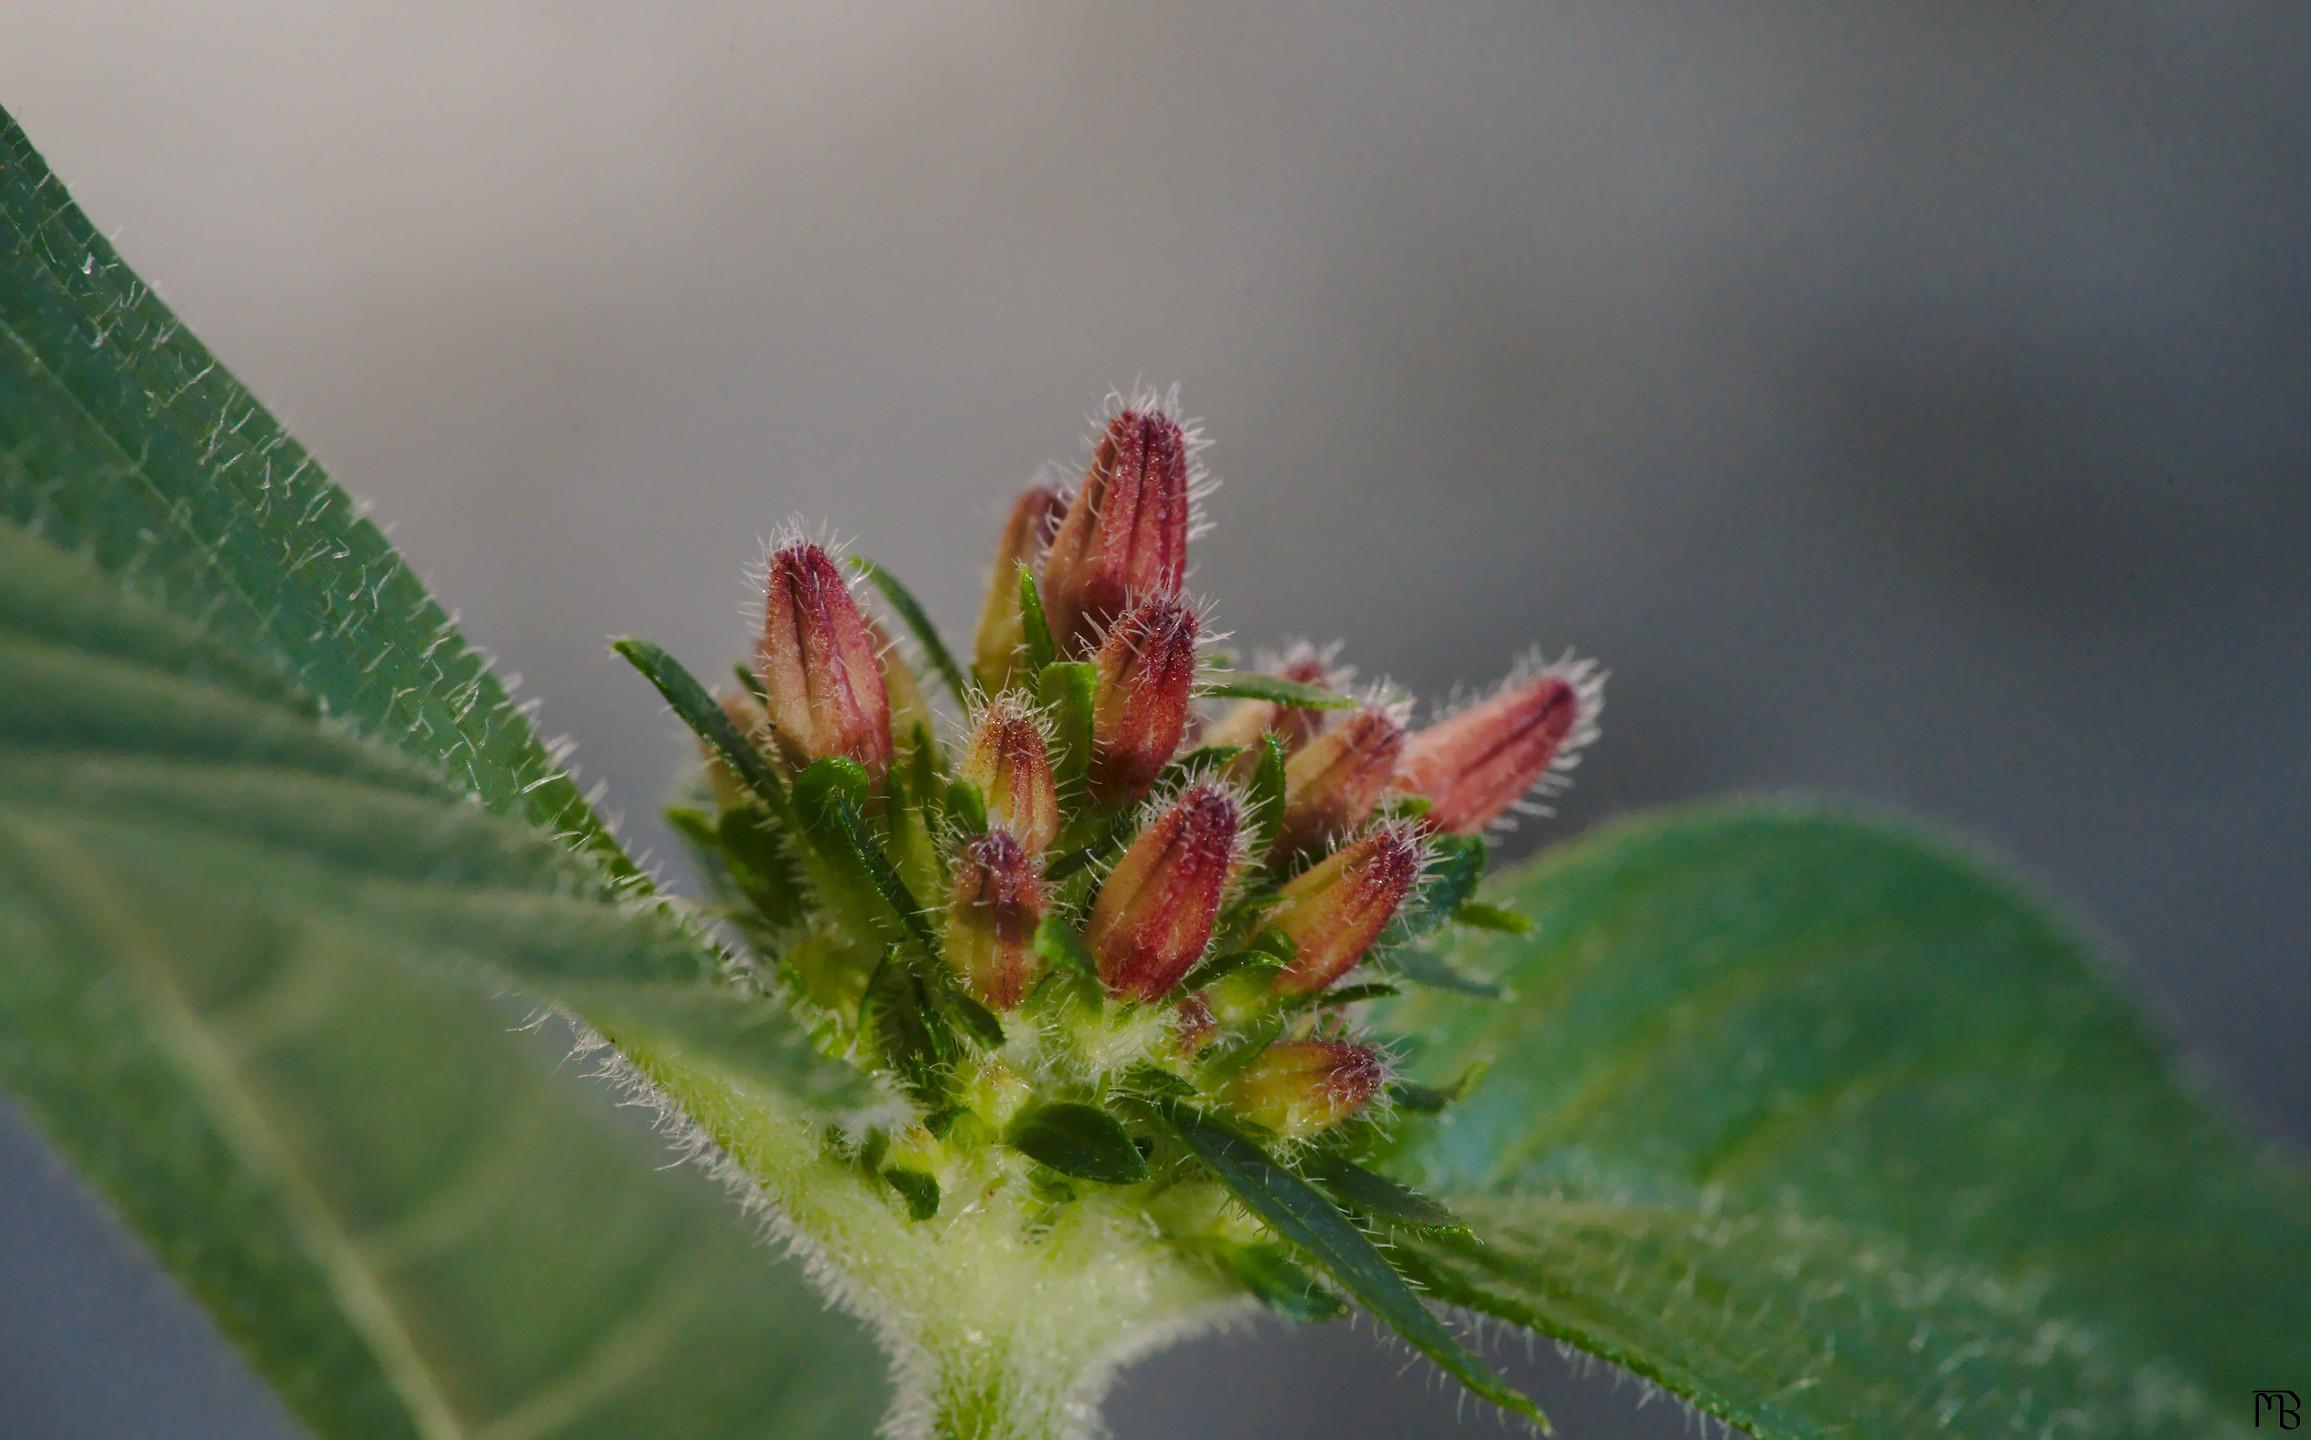 Flower buds on plant